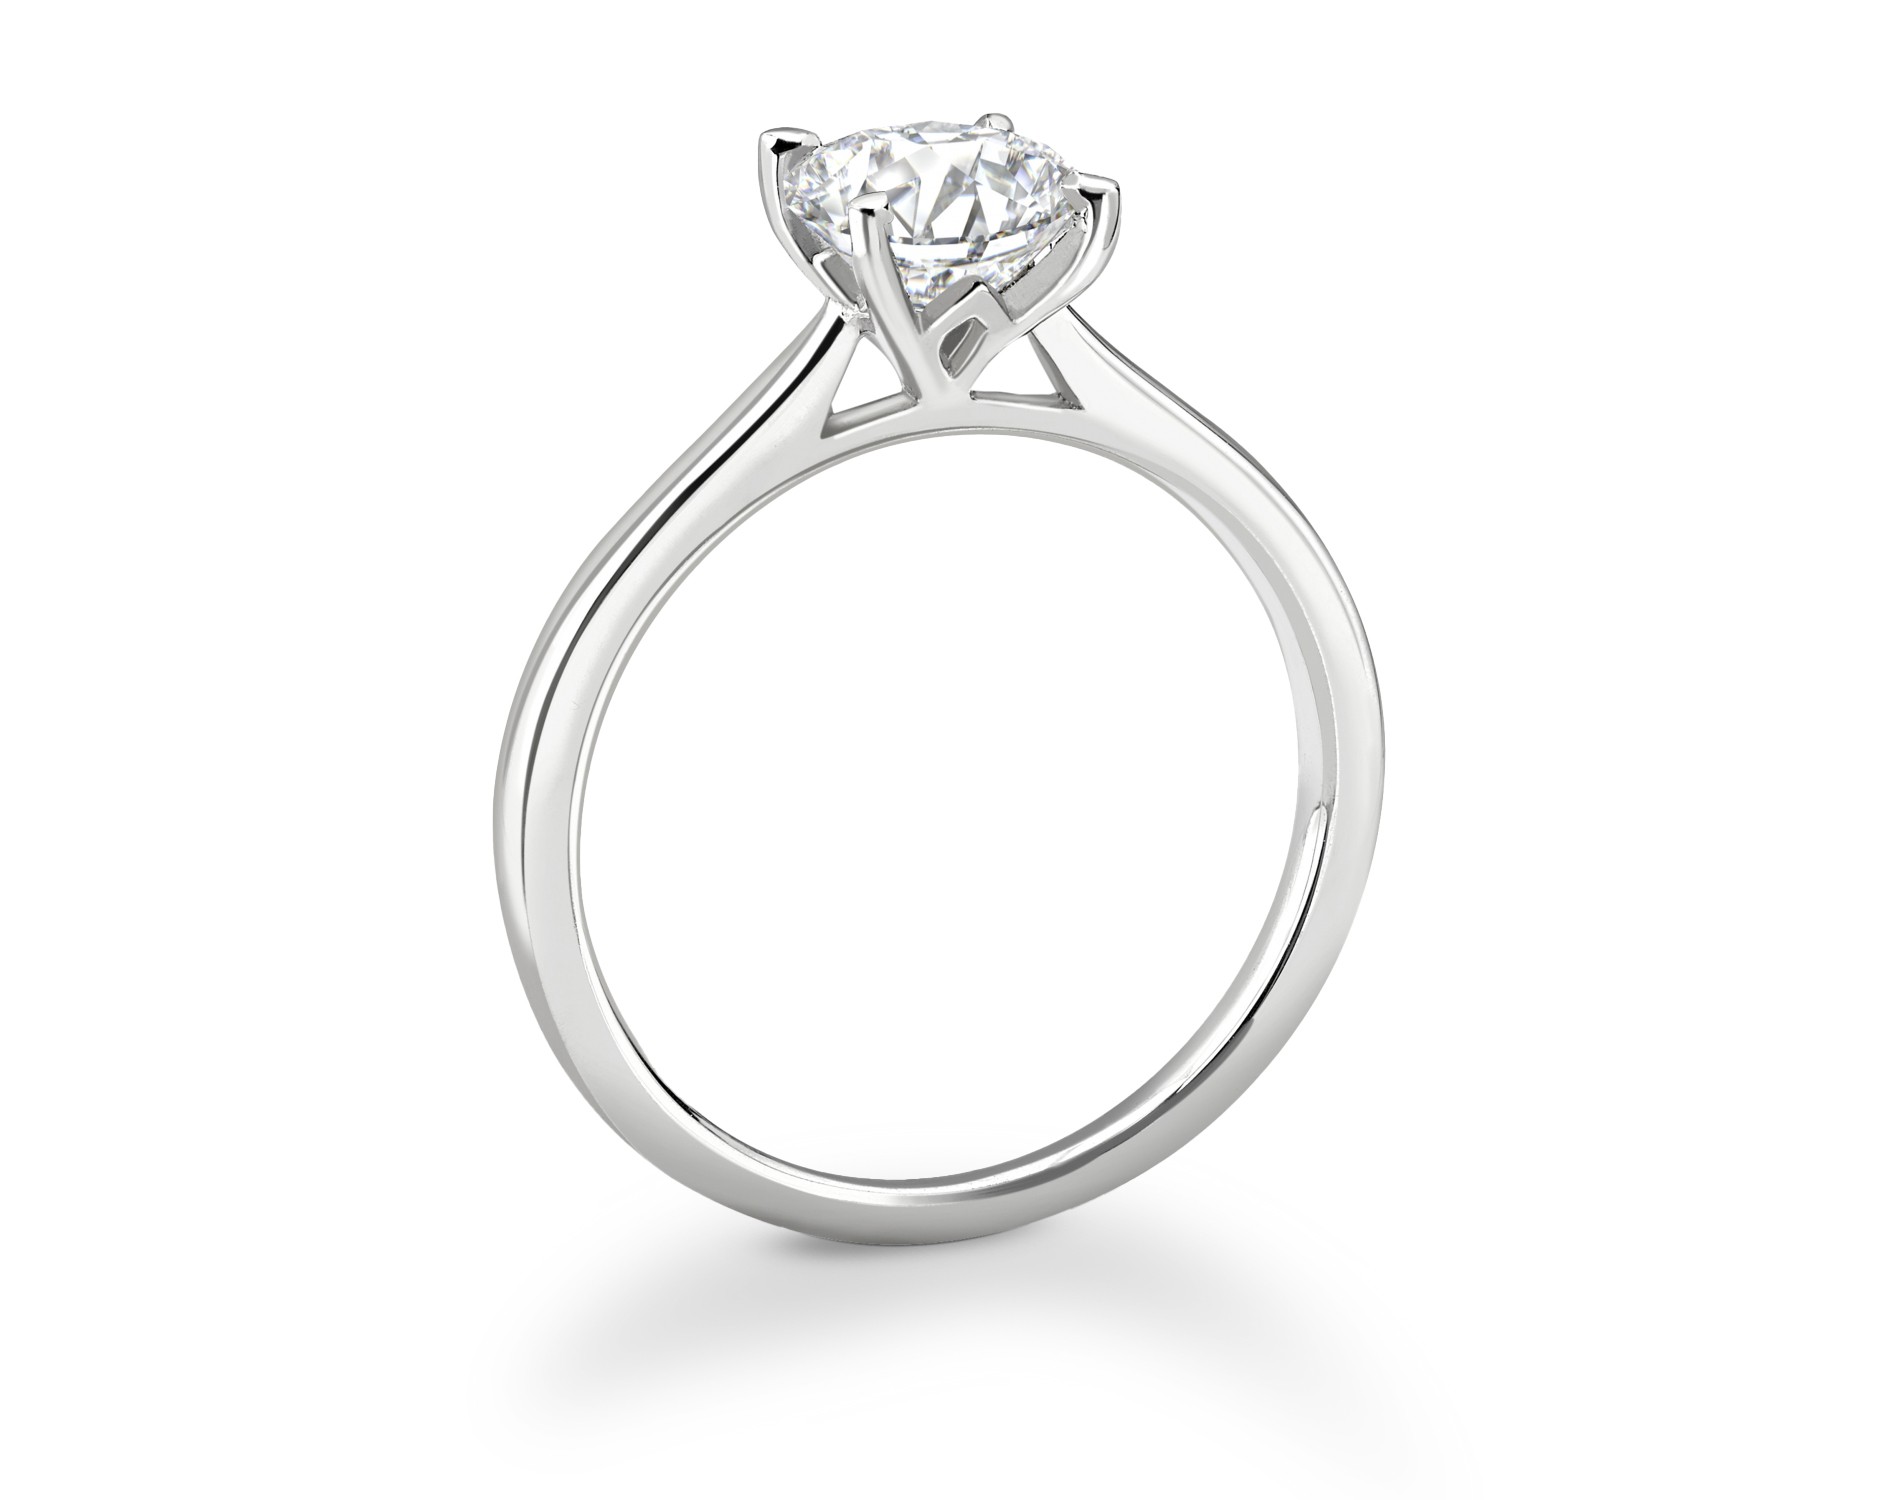 18K WHITE GOLD ROUND CUT 4 PRONGS SOLITAIRE DIAMOND ENGAGEMENT RING